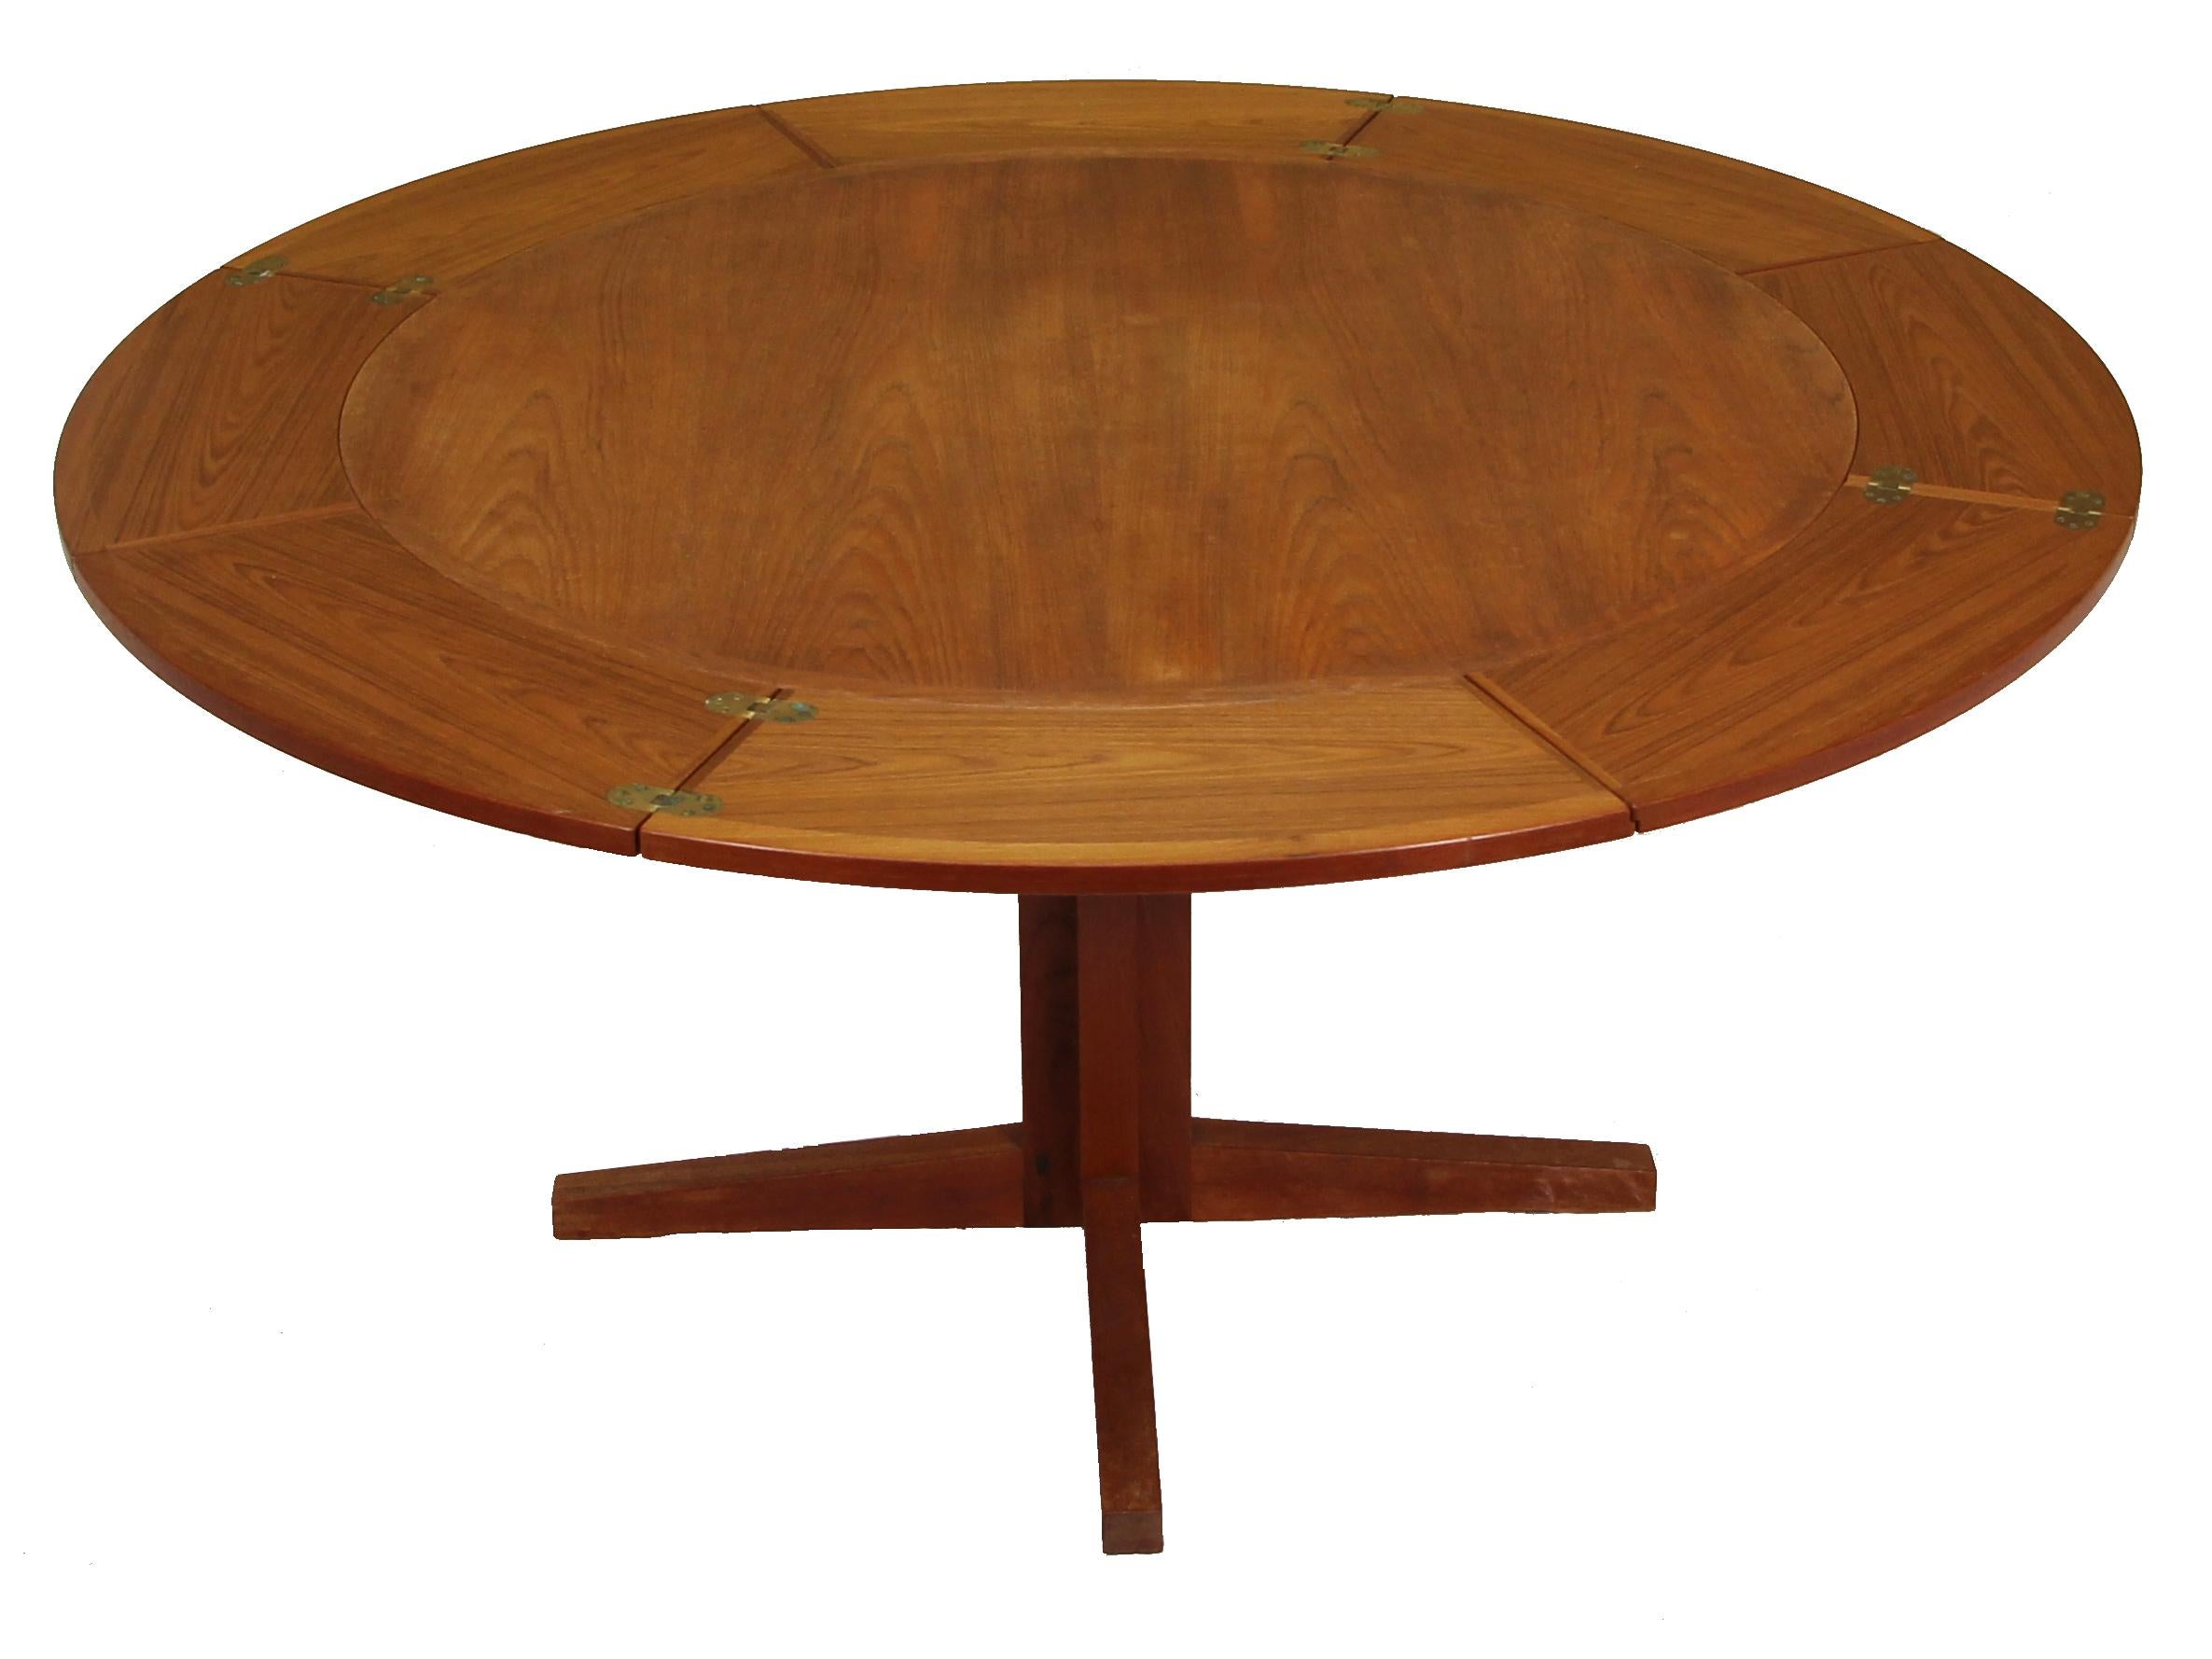 Very unique Lotus or flip flap dining table made by Dyrlund in Denmark in the 1960s. 
The table has a unique design. It has a pedestal base. It extends by unfolding four small leaves that are hidden underneath the center. Hence the name Lotus or